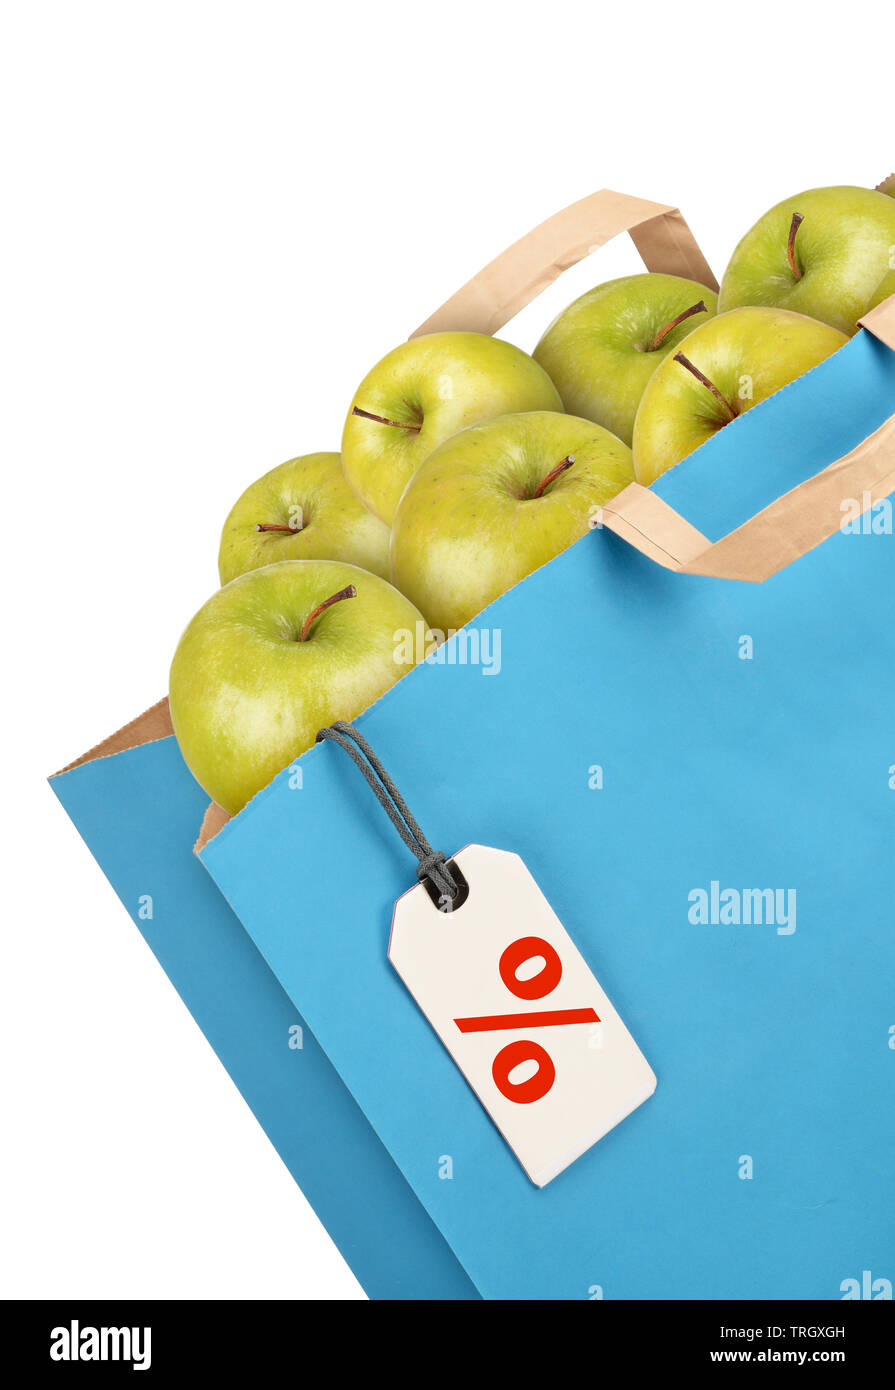 Grocery bag with apples isolated on white background Stock Photo